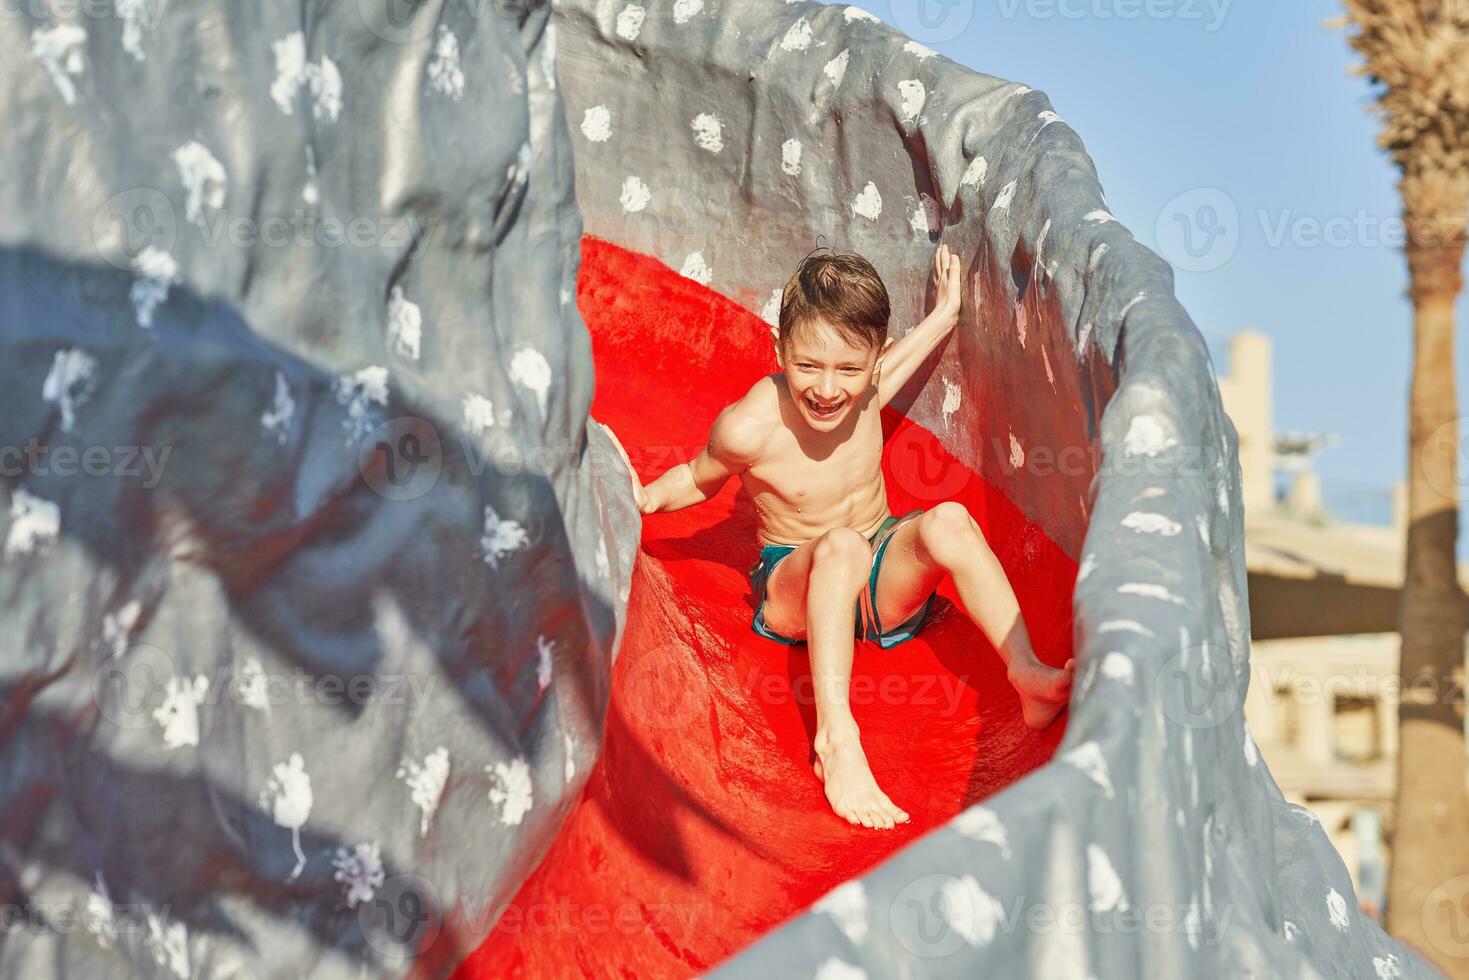 Picture of young boy playing in outdoor aqua park photo